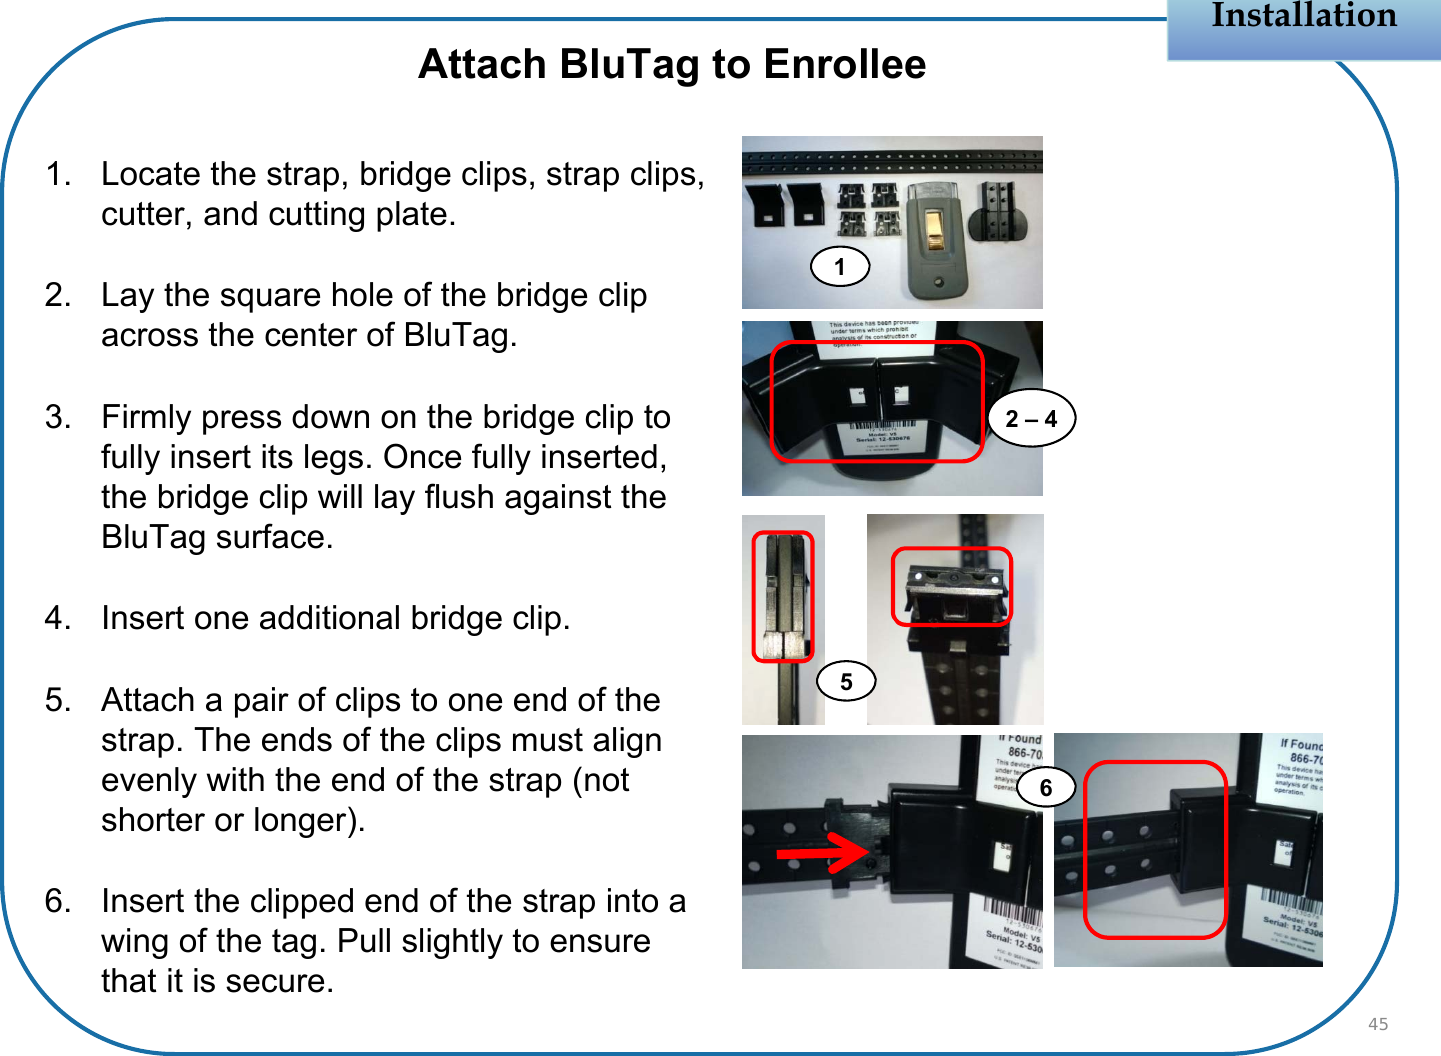 Installation1. Locate the strap, bridge clips, strap clips, cutter, and cutting plate.2. Lay the square hole of the bridge clip across the center of BluTag.3. Firmly press down on the bridge clip to fully insert its legs. Once fully inserted, the bridge clip will lay flush against the BluTag surface.4. Insert one additional bridge clip.5. Attach a pair of clips to one end of the strap. The ends of the clips must align evenly with the end of the strap (not shorter or longer).6. Insert the clipped end of the strap into a wing of the tag. Pull slightly to ensure that it is secure. 45Attach BluTag to Enrollee12 – 456